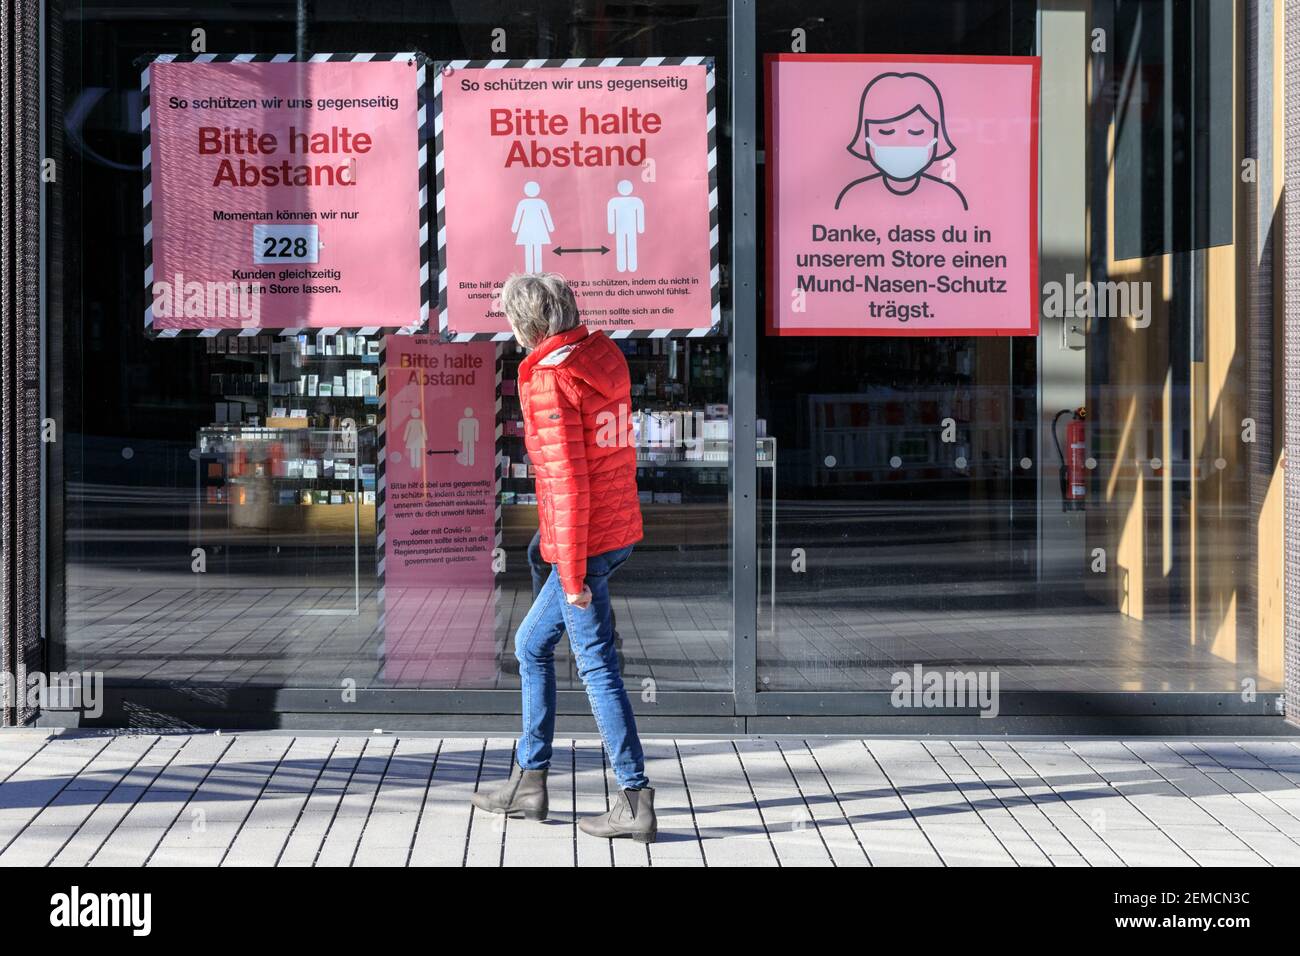 A woman looks at a shop window with social distancing and mask wearing rules, Düsseldorf, Germany Stock Photo